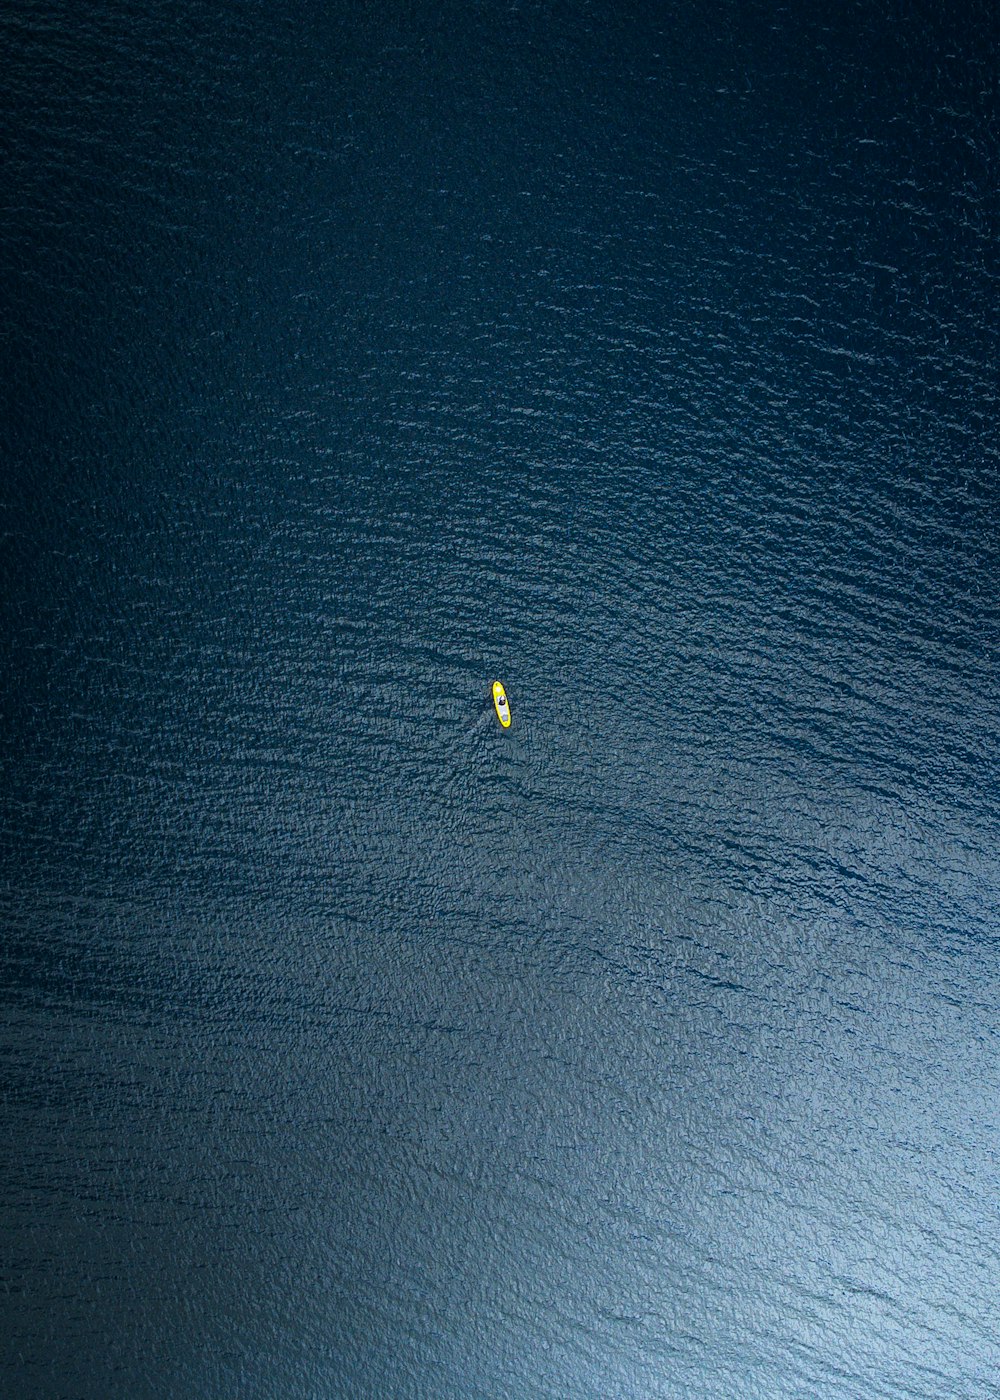 a yellow object floating in the middle of a body of water